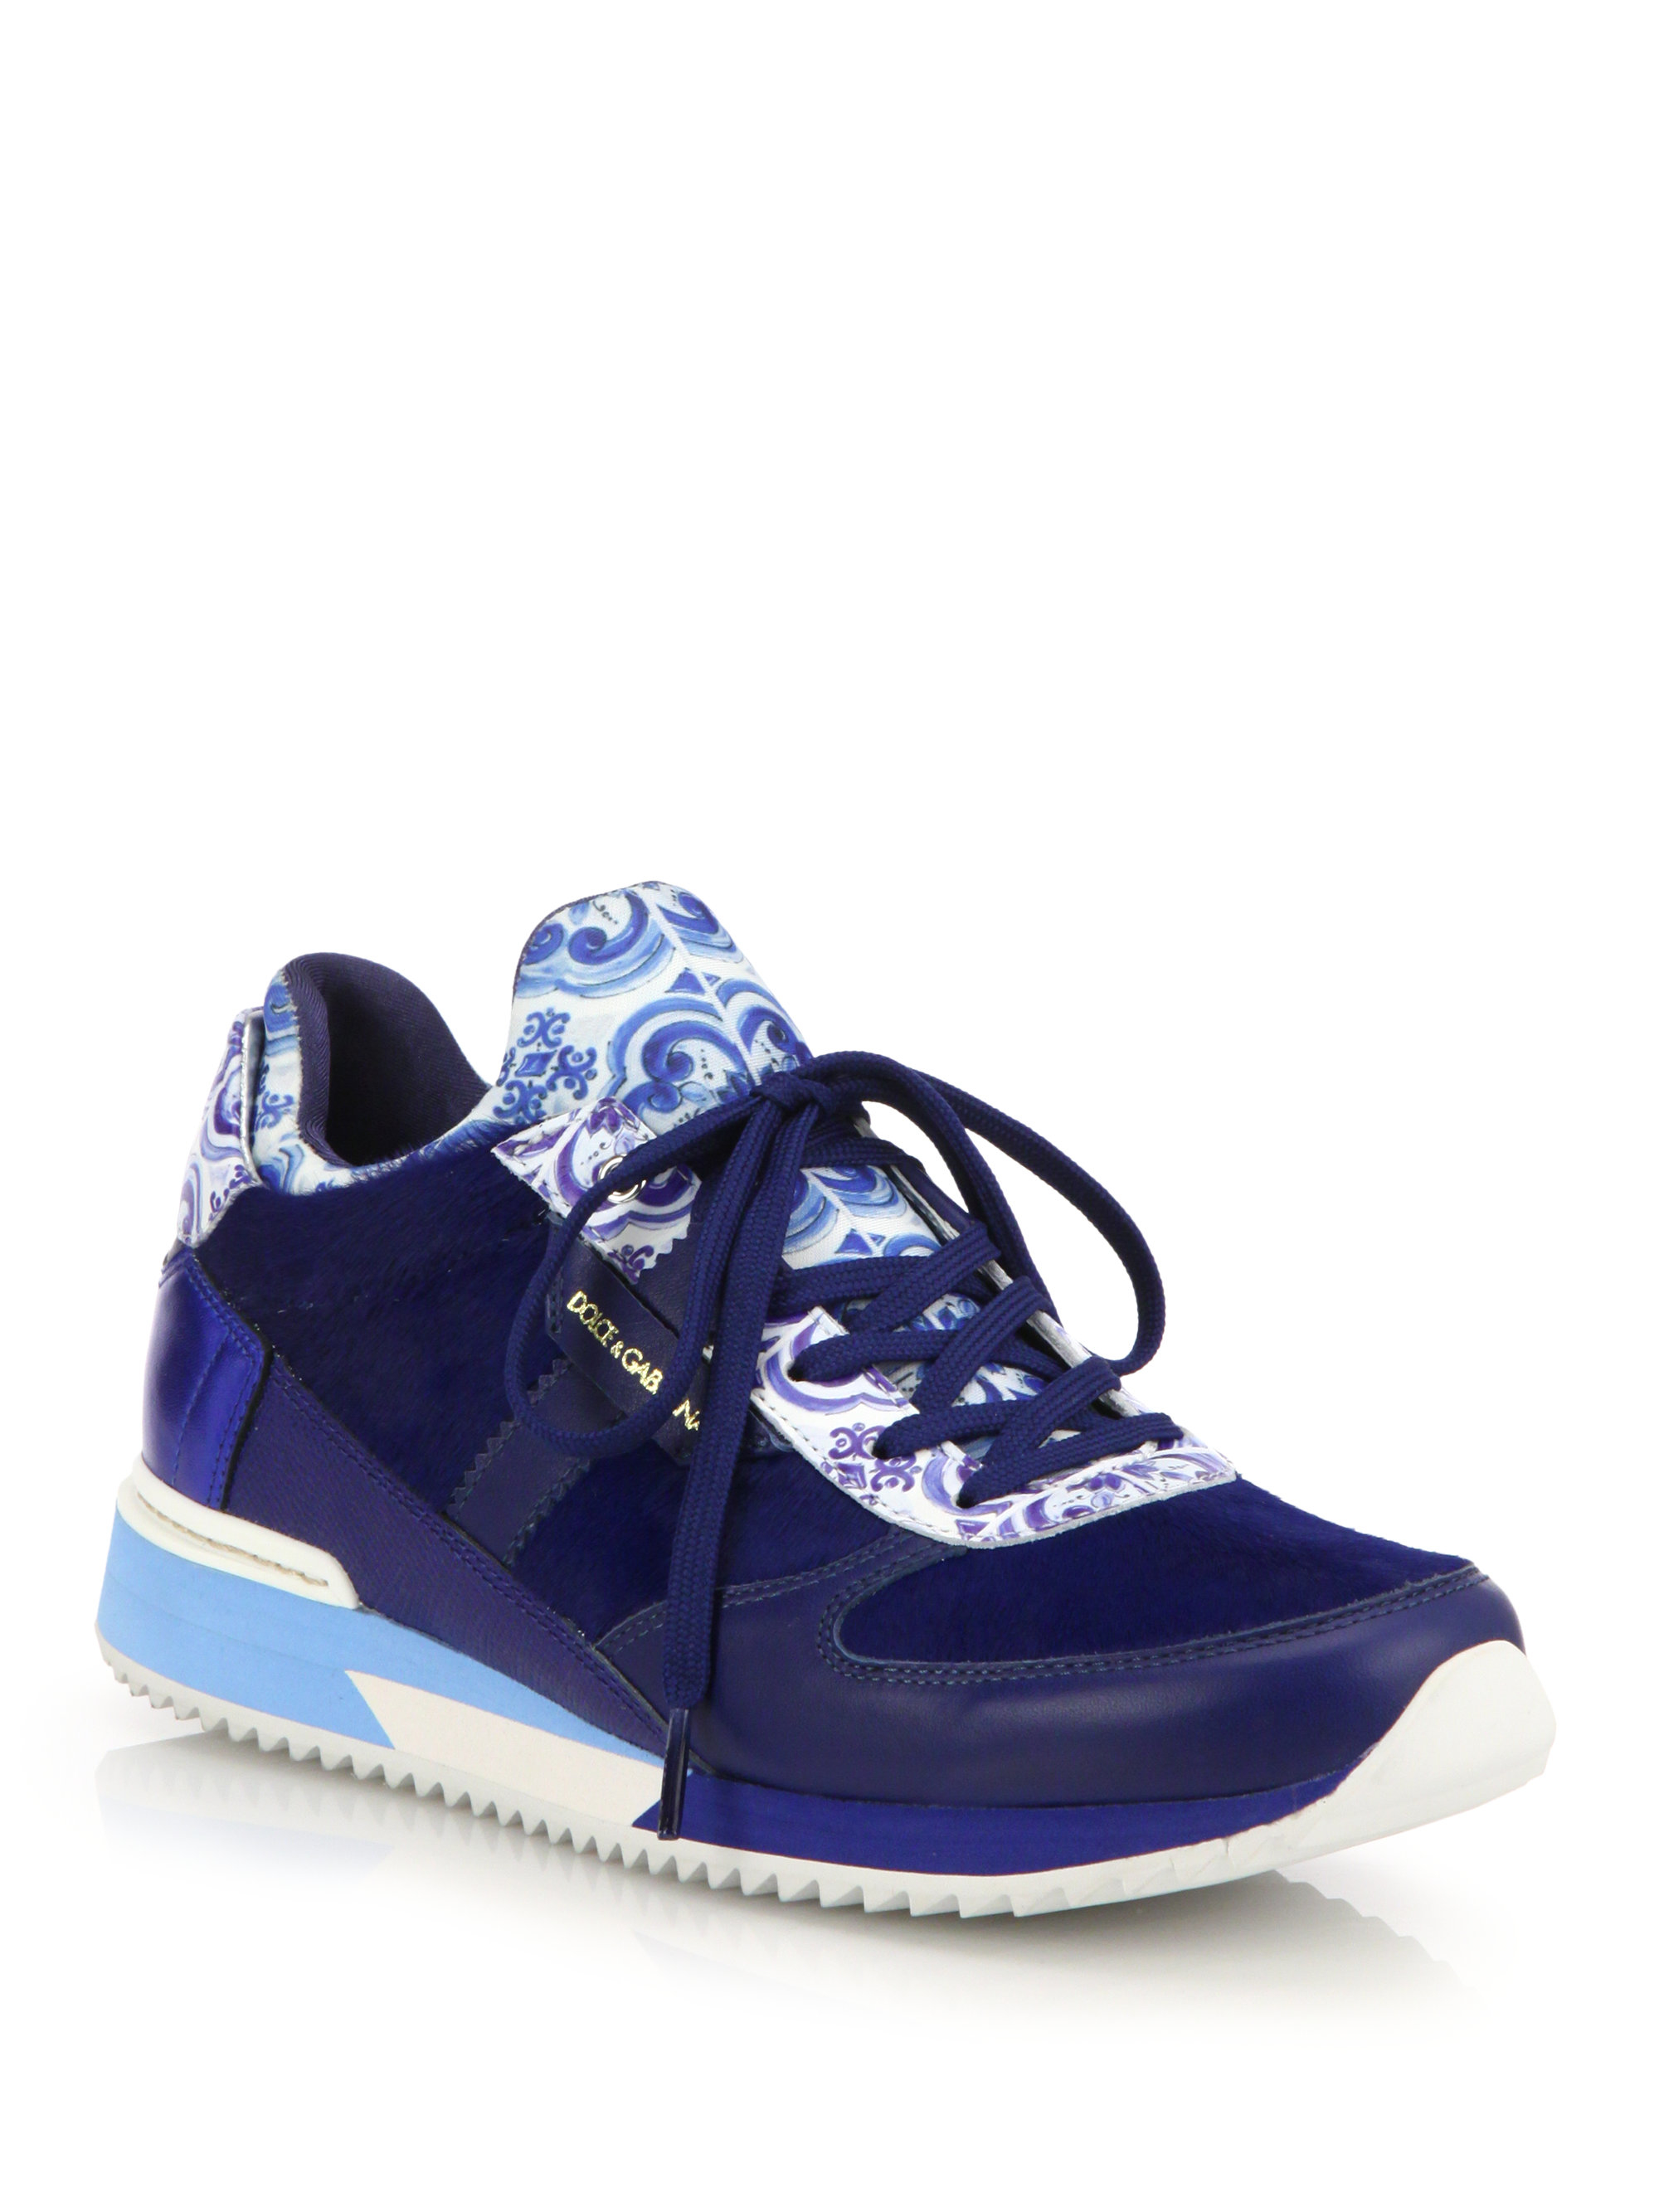 Lyst - Dolce & Gabbana Tile-Print Leather & Calf Hair Sneakers in Blue